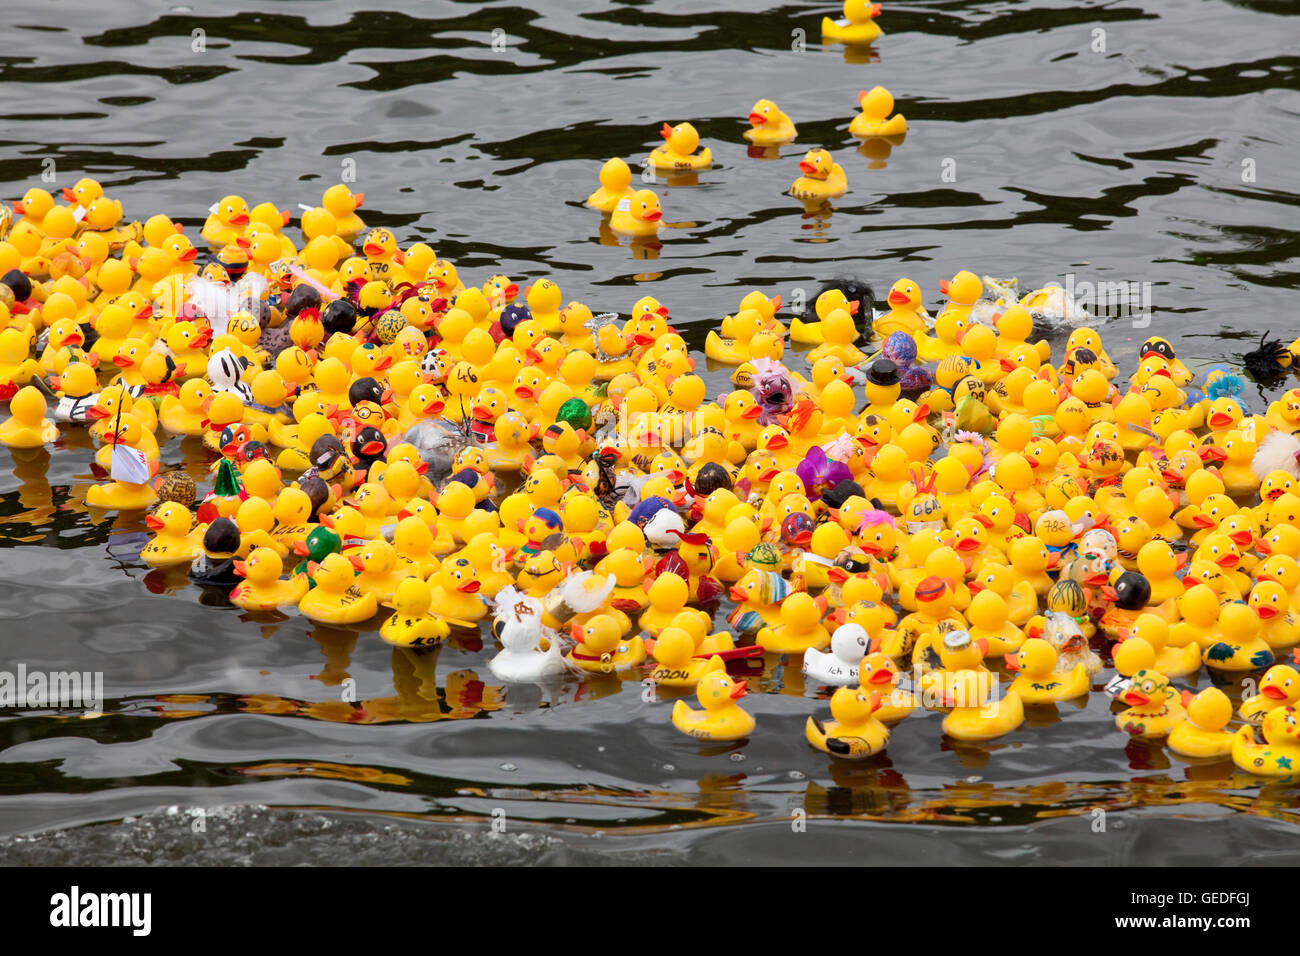 Germany, Ruhr area, Witten, duck race on the river Ruhr. Stock Photo